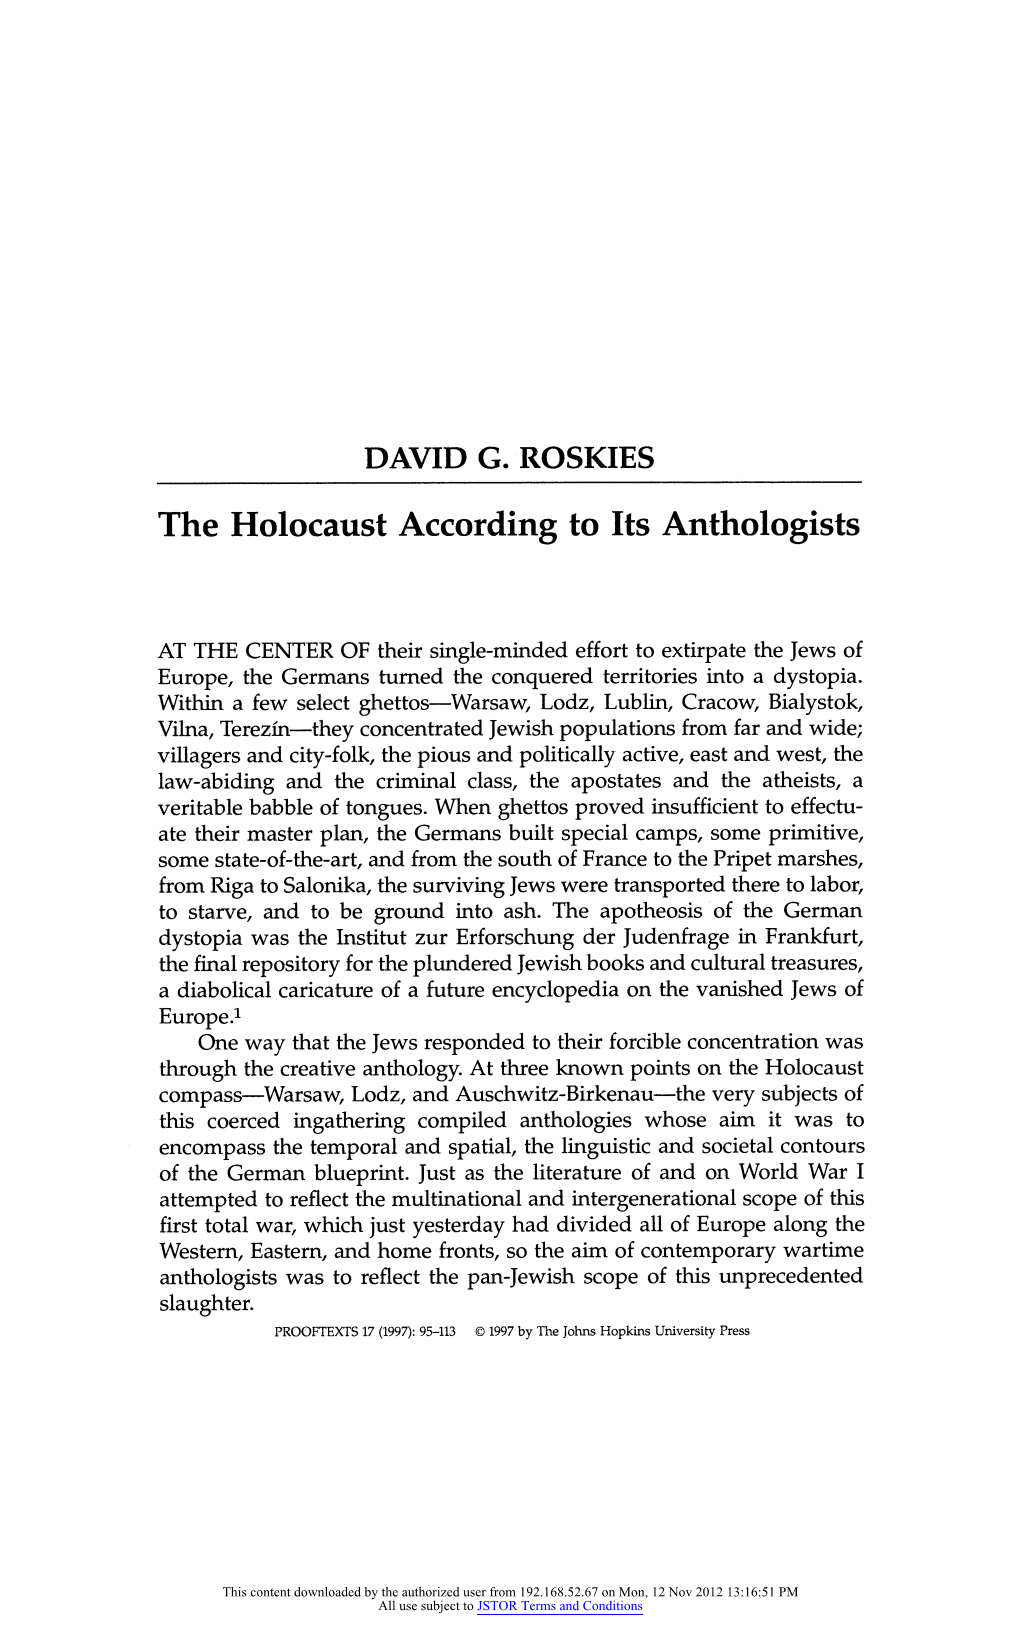 DAVID G. ROSKIES the Holocaust According to Its Anthologists